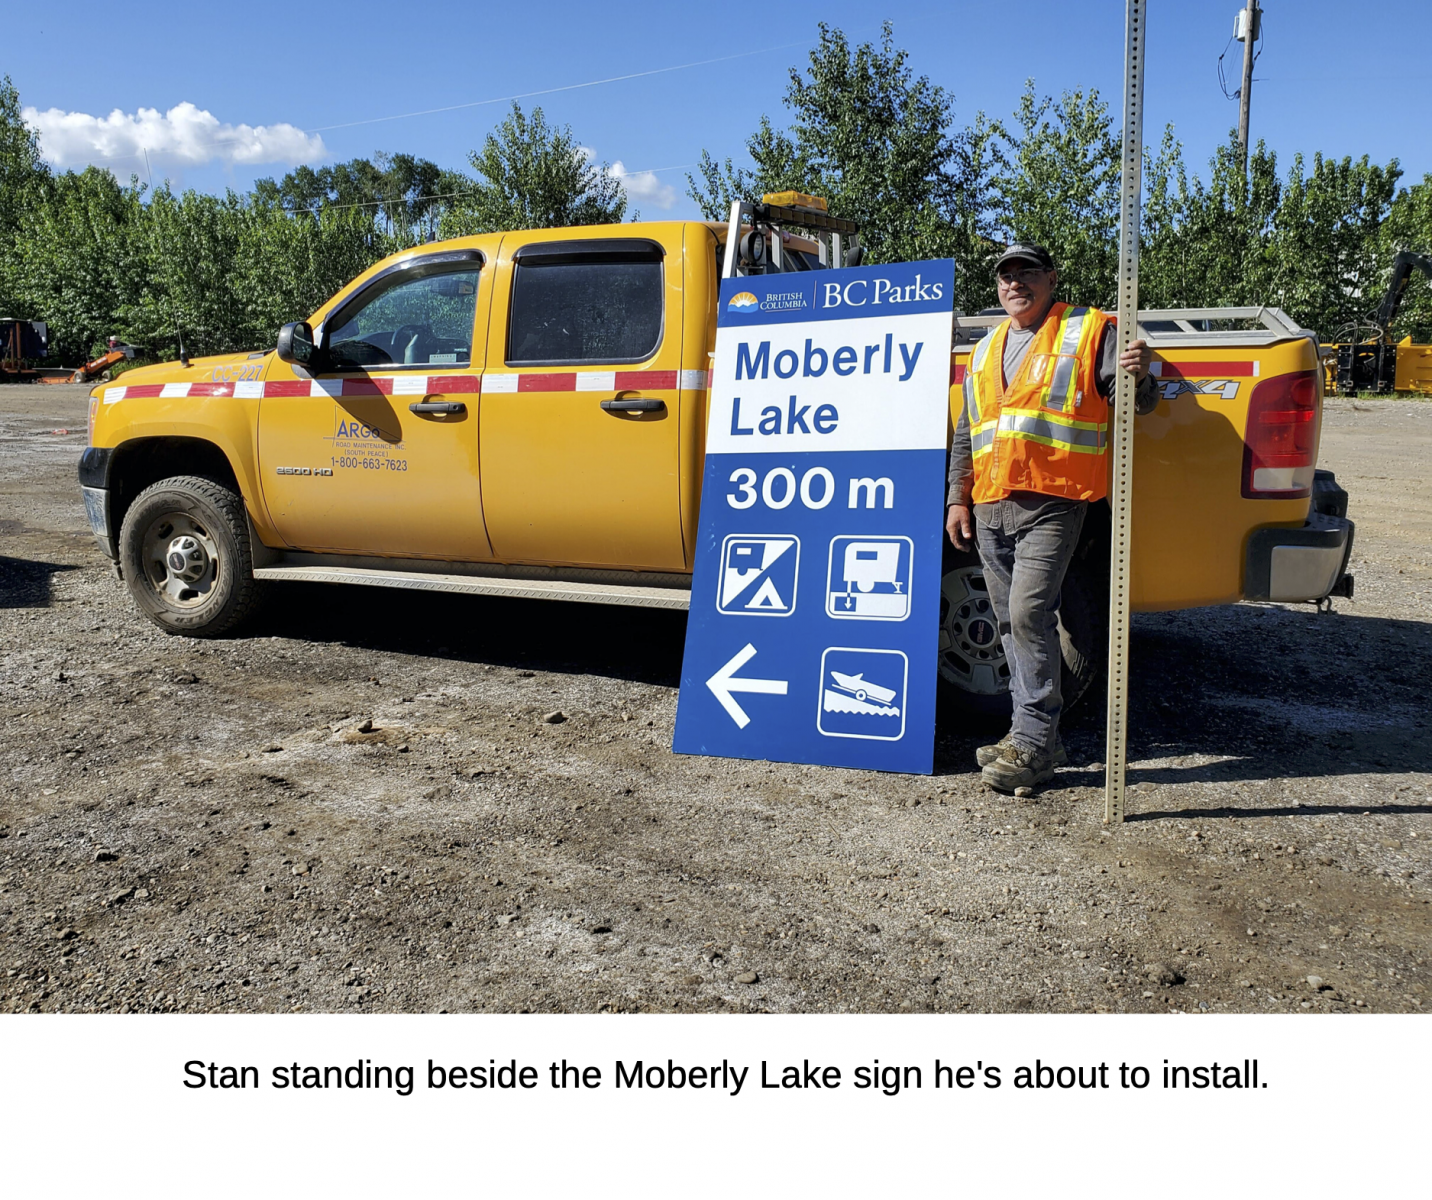 Stan standing beside the Moberly Lake sign he's about to install.